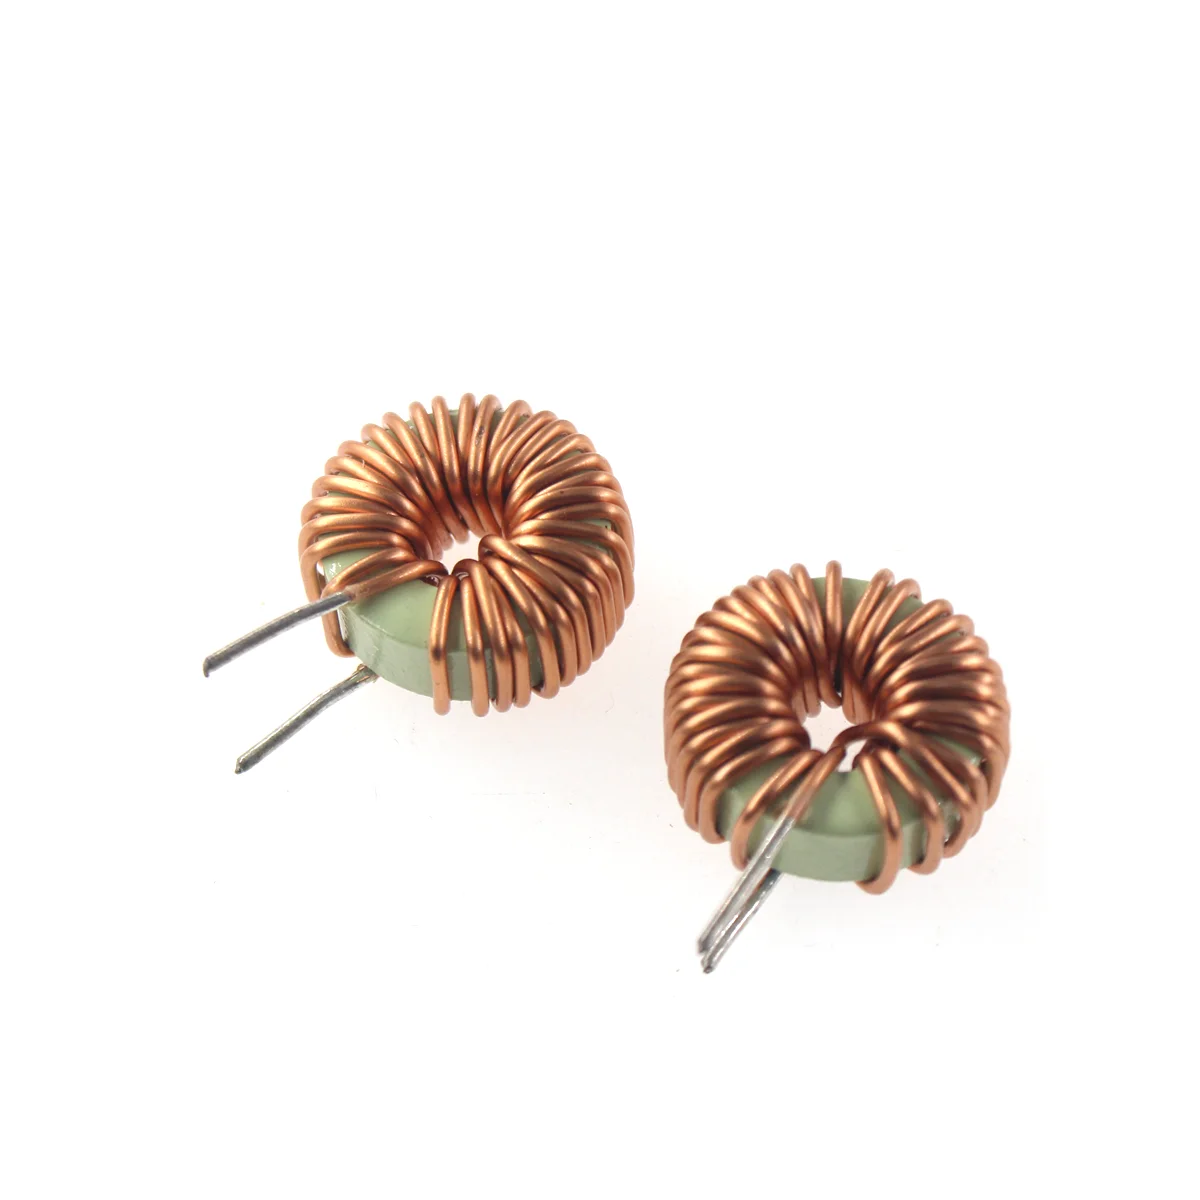 5pcs 20MM 8052B-100/68/48/33/22UH blue and green ring multi-specification magnetic ring inductor inductor